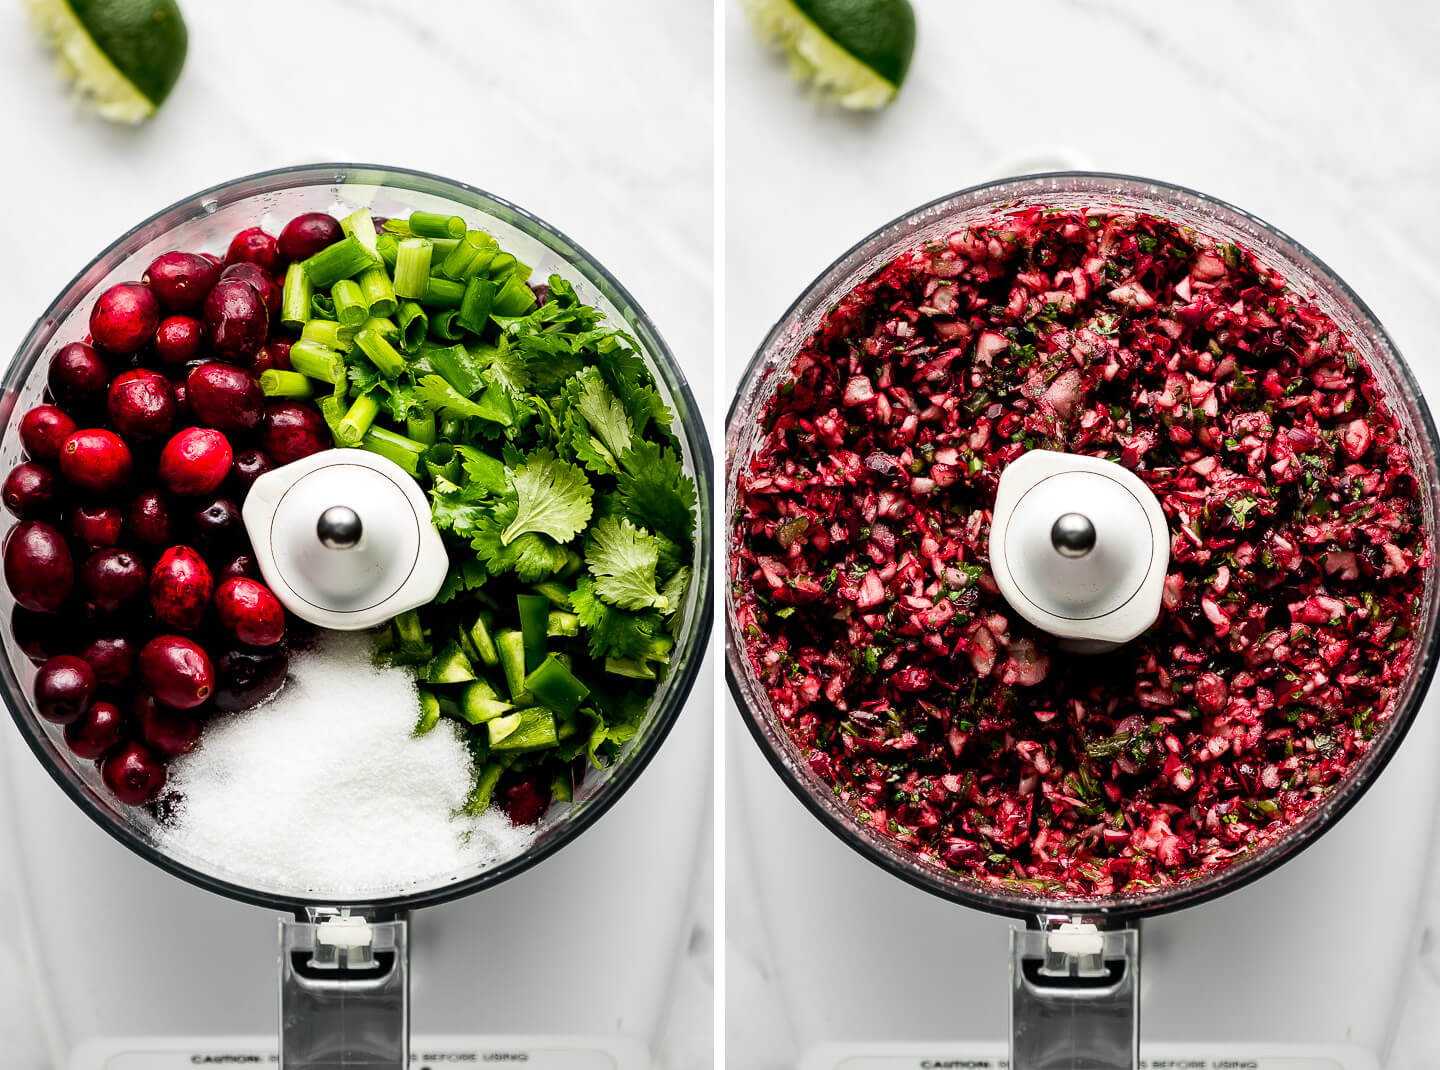 Diptych- Food processor with cranberries, green onion, cilantro, jalapeno, and sugar; roughly blended together.